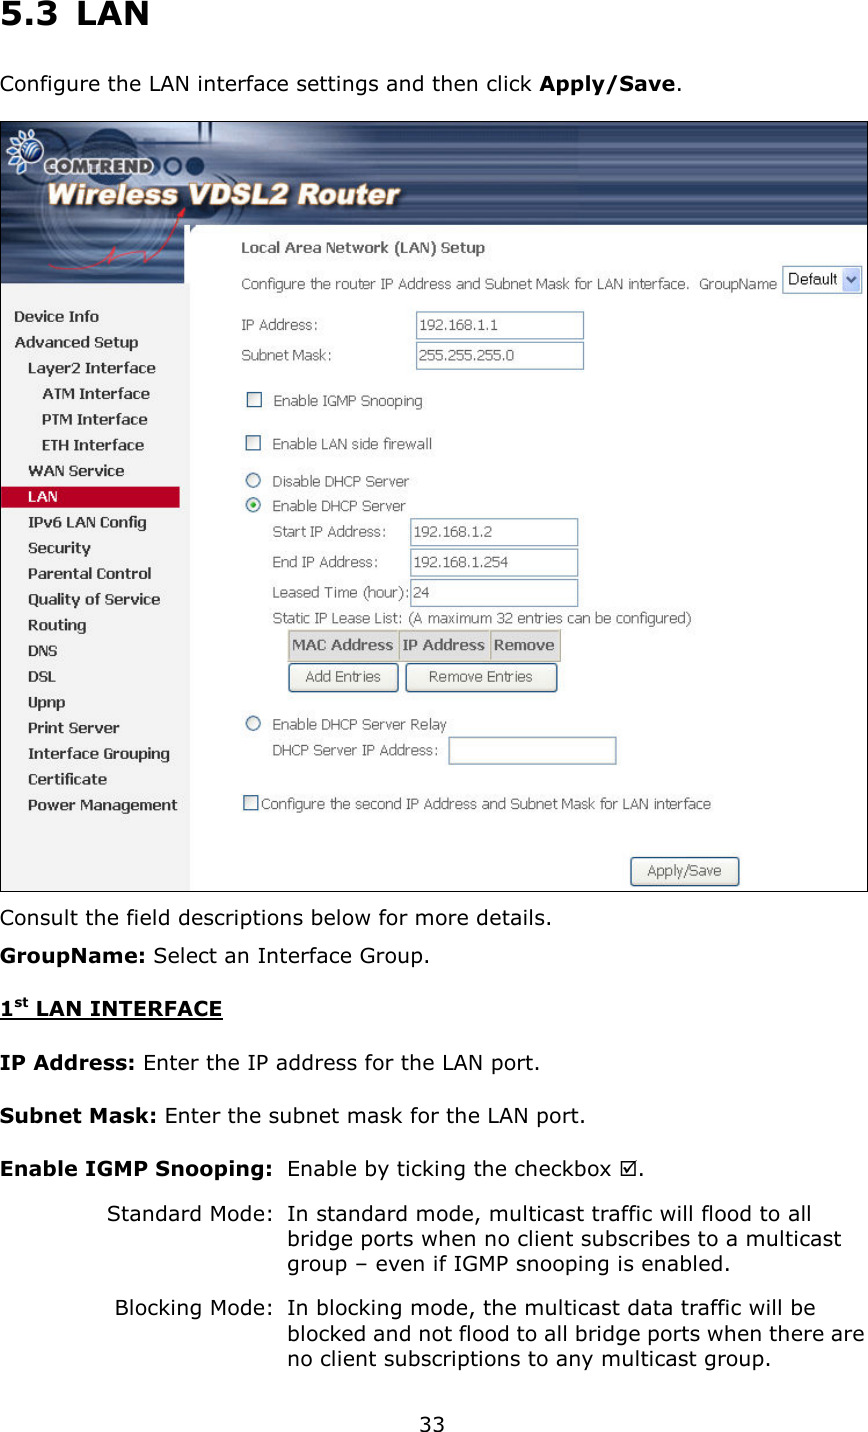   33 5.3  LAN Configure the LAN interface settings and then click Apply/Save.   Consult the field descriptions below for more details. GroupName: Select an Interface Group. 1st LAN INTERFACE IP Address: Enter the IP address for the LAN port. Subnet Mask: Enter the subnet mask for the LAN port. Enable IGMP Snooping:   Enable by ticking the checkbox .    Standard Mode:   In standard mode, multicast traffic will flood to all       bridge ports when no client subscribes to a multicast       group – even if IGMP snooping is enabled.     Blocking Mode:   In blocking mode, the multicast data traffic will be       blocked and not flood to all bridge ports when there are     no client subscriptions to any multicast group. 